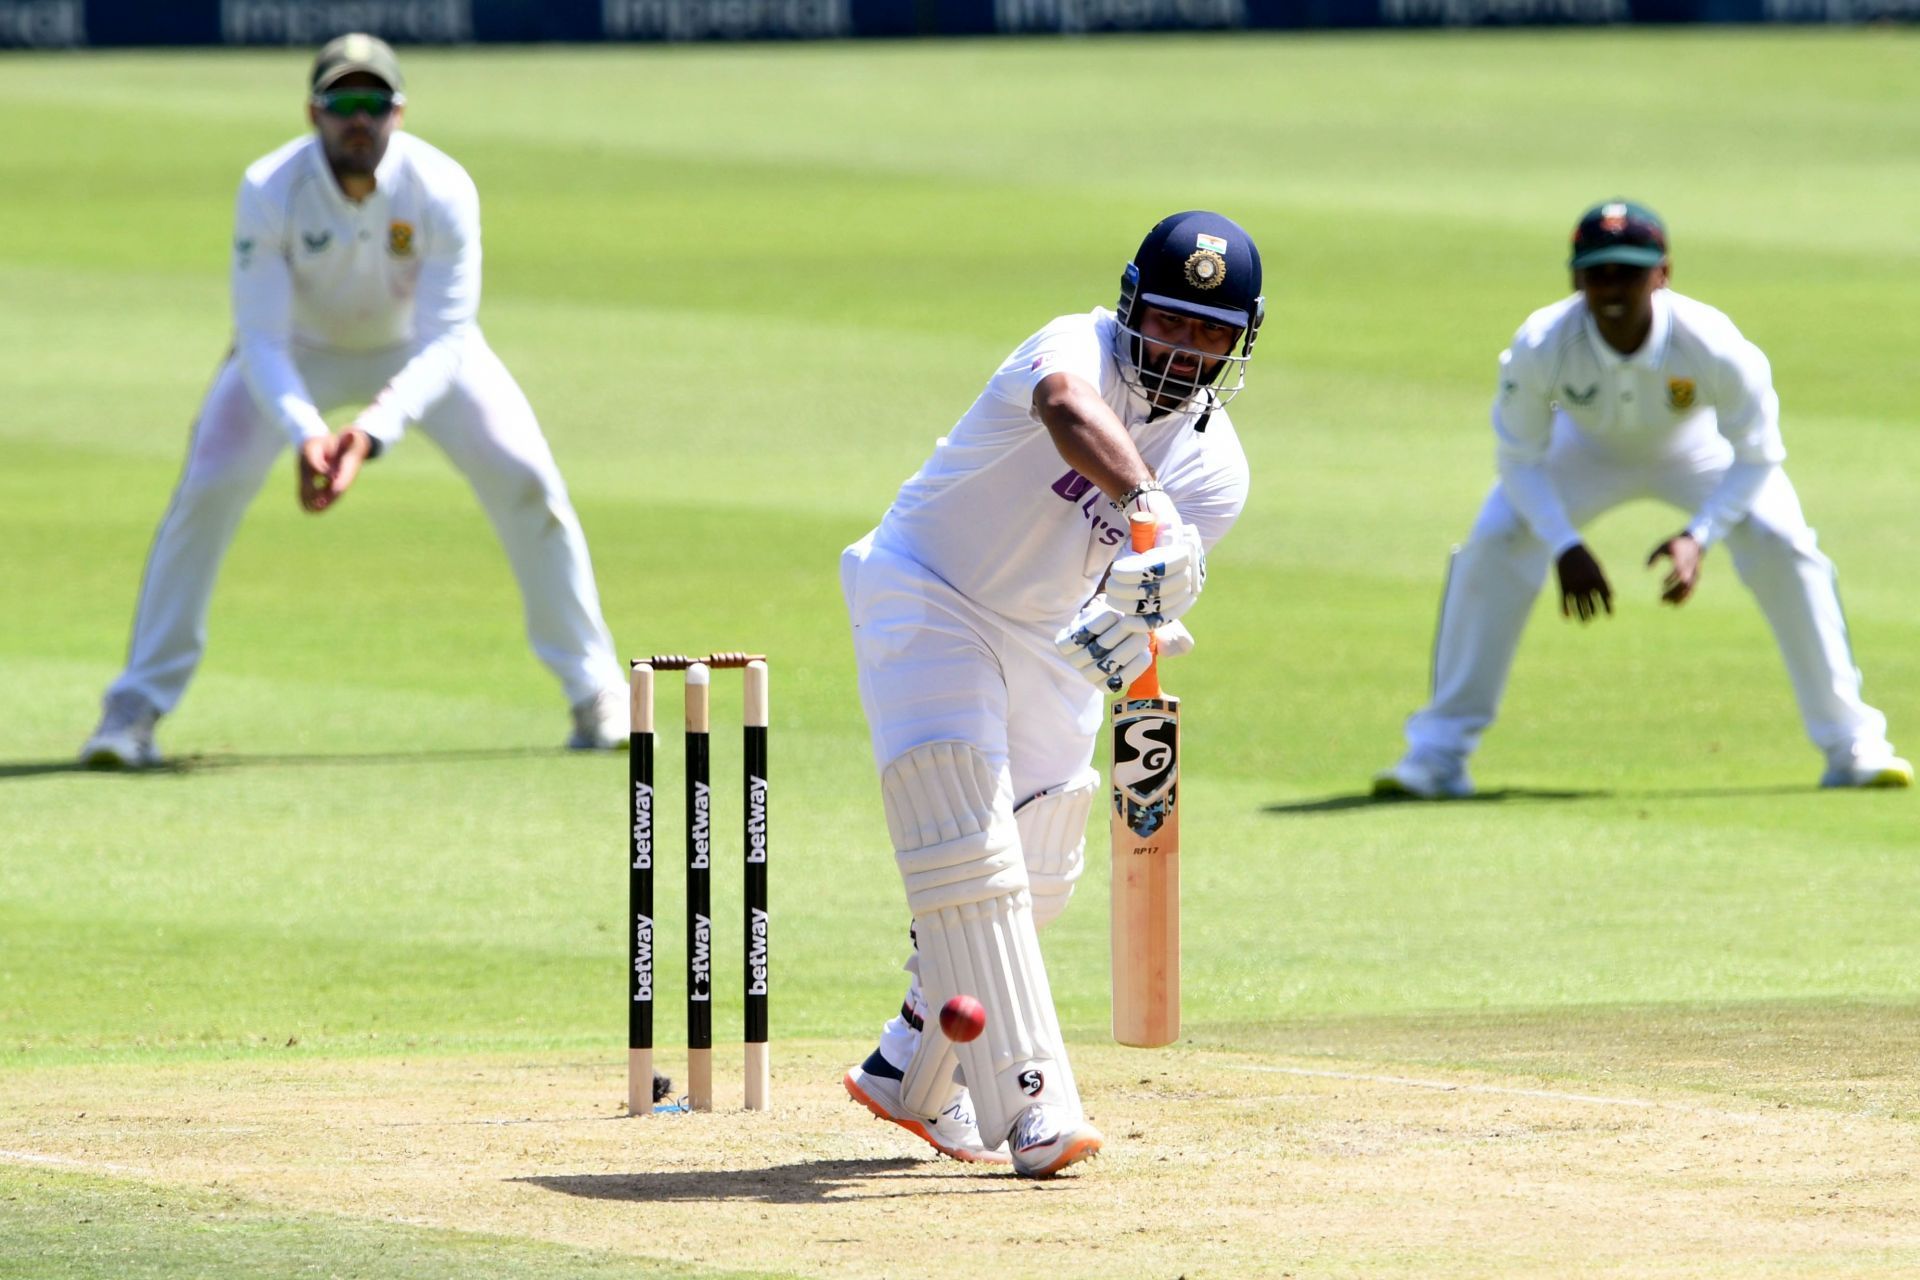 Rishabh Pant batting during the Johannesburg Test. Pic: Getty Images